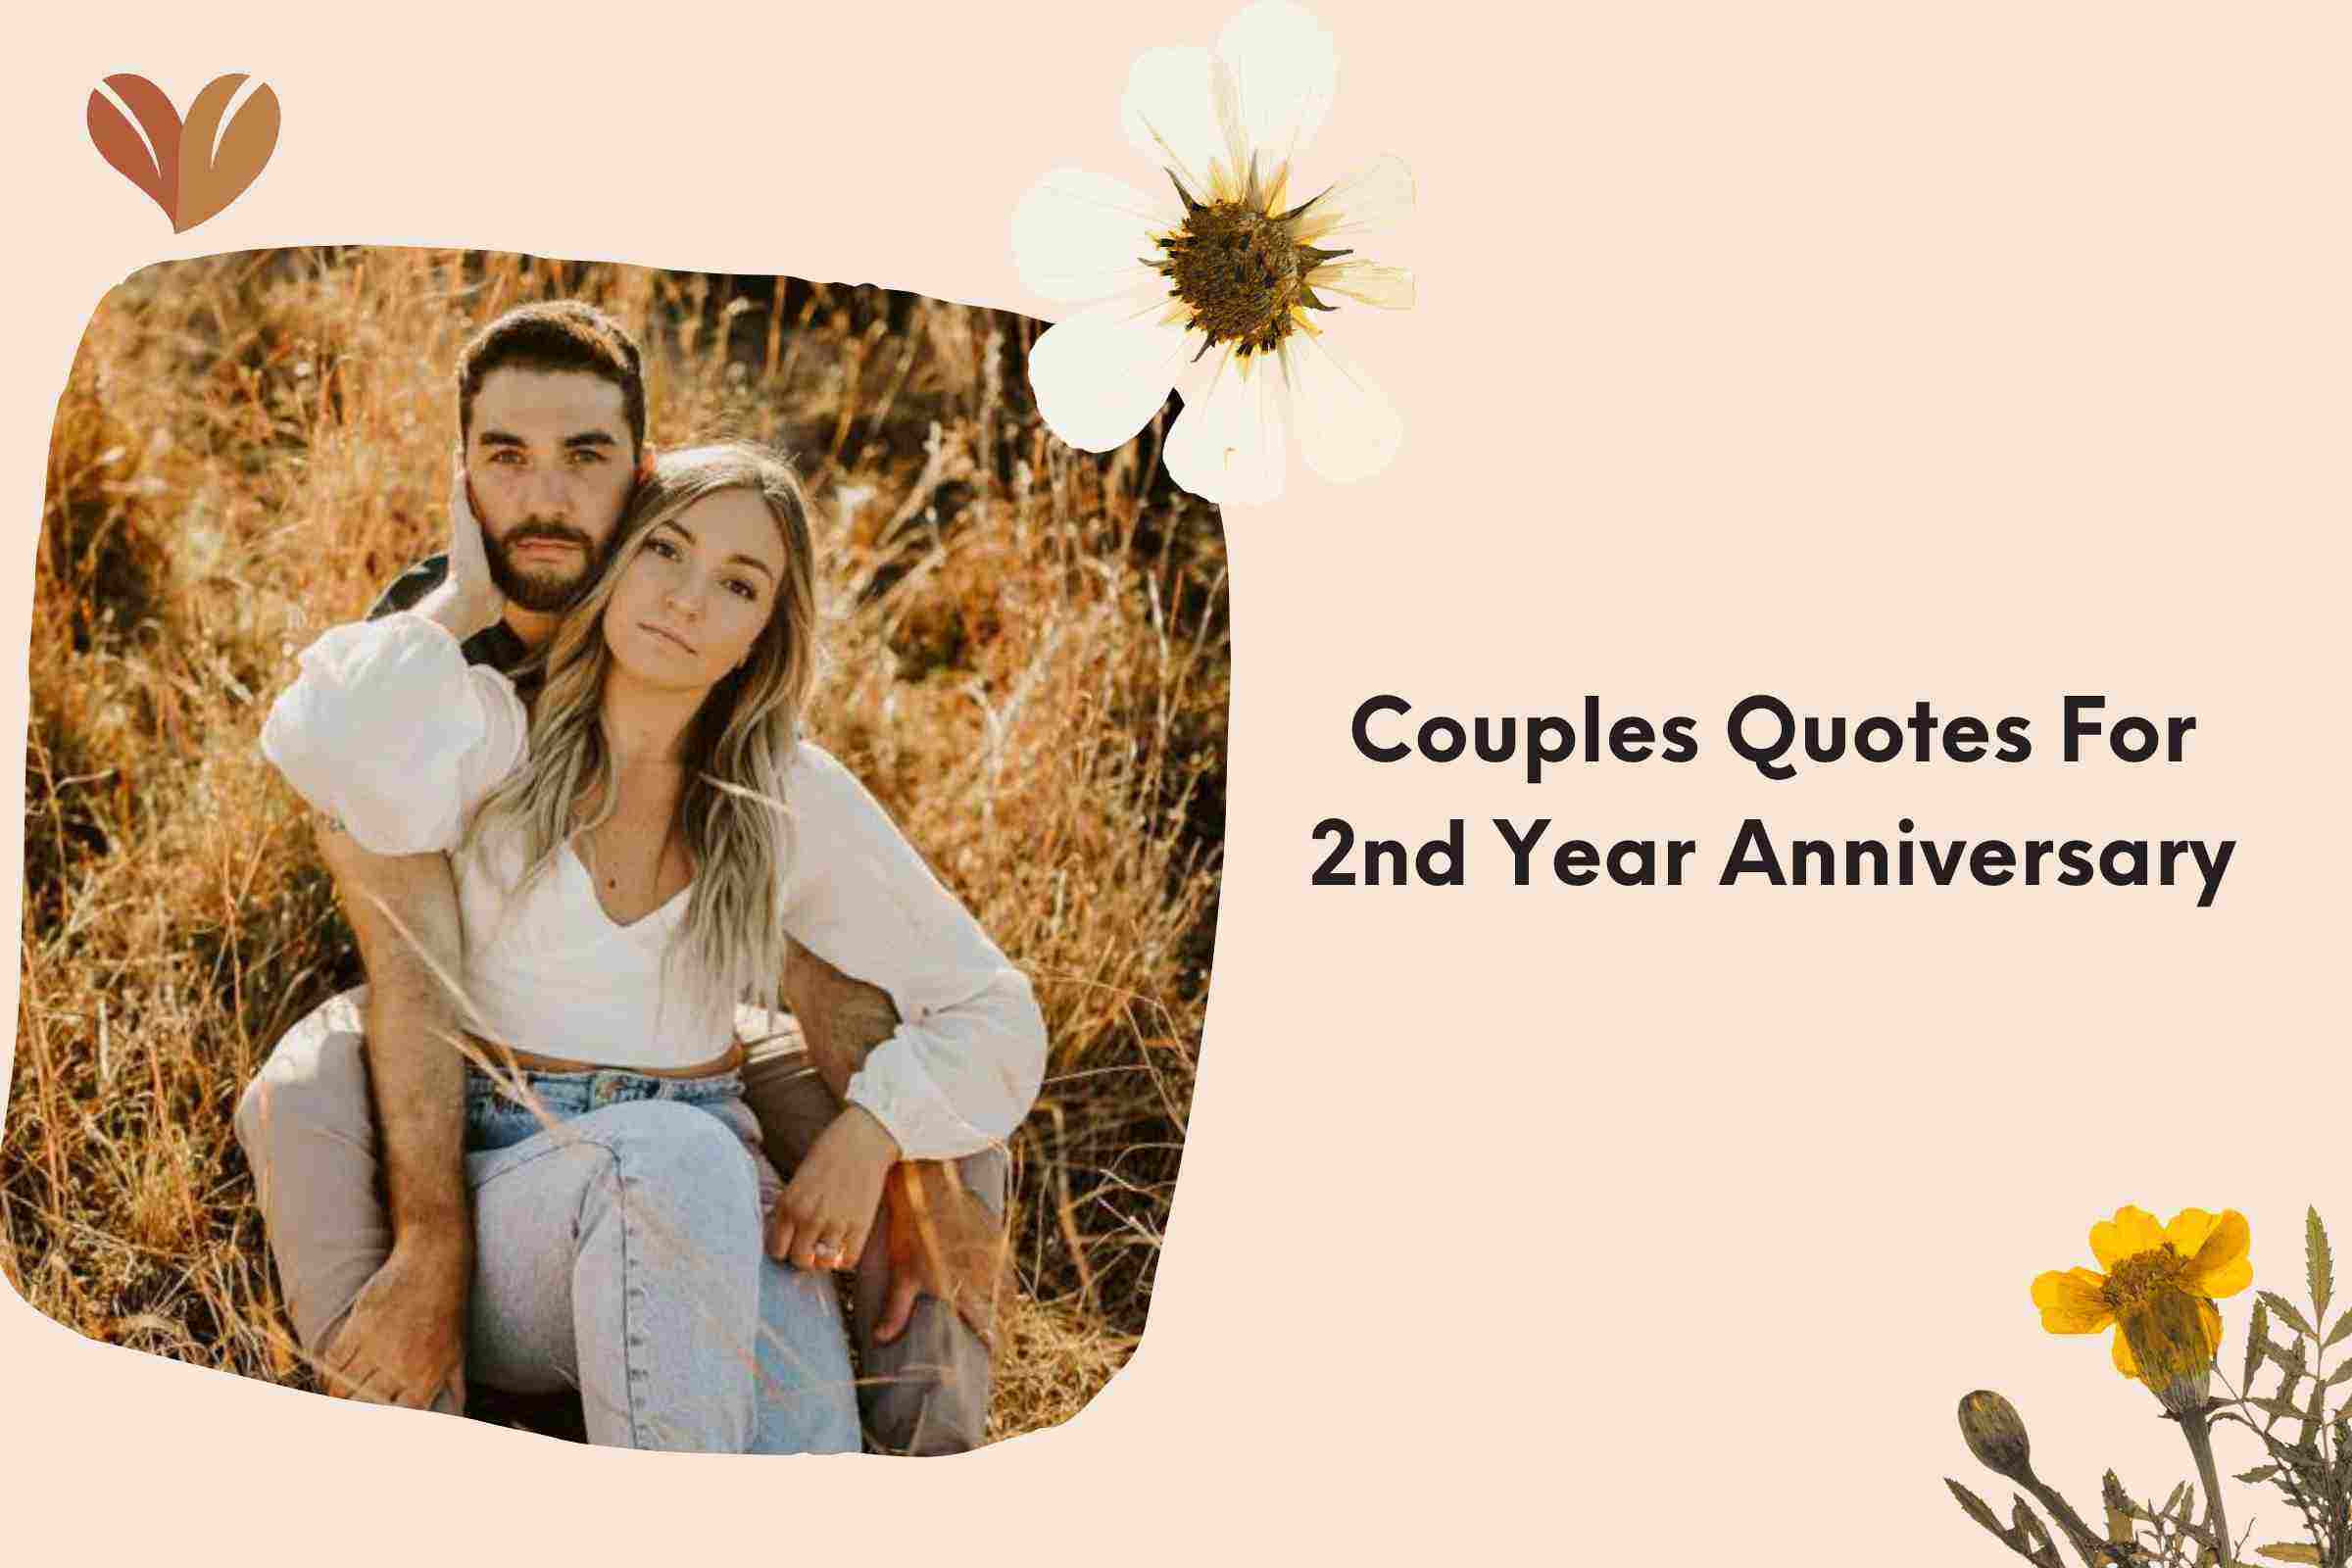 Couples Quotes For 2nd Year Anniversary